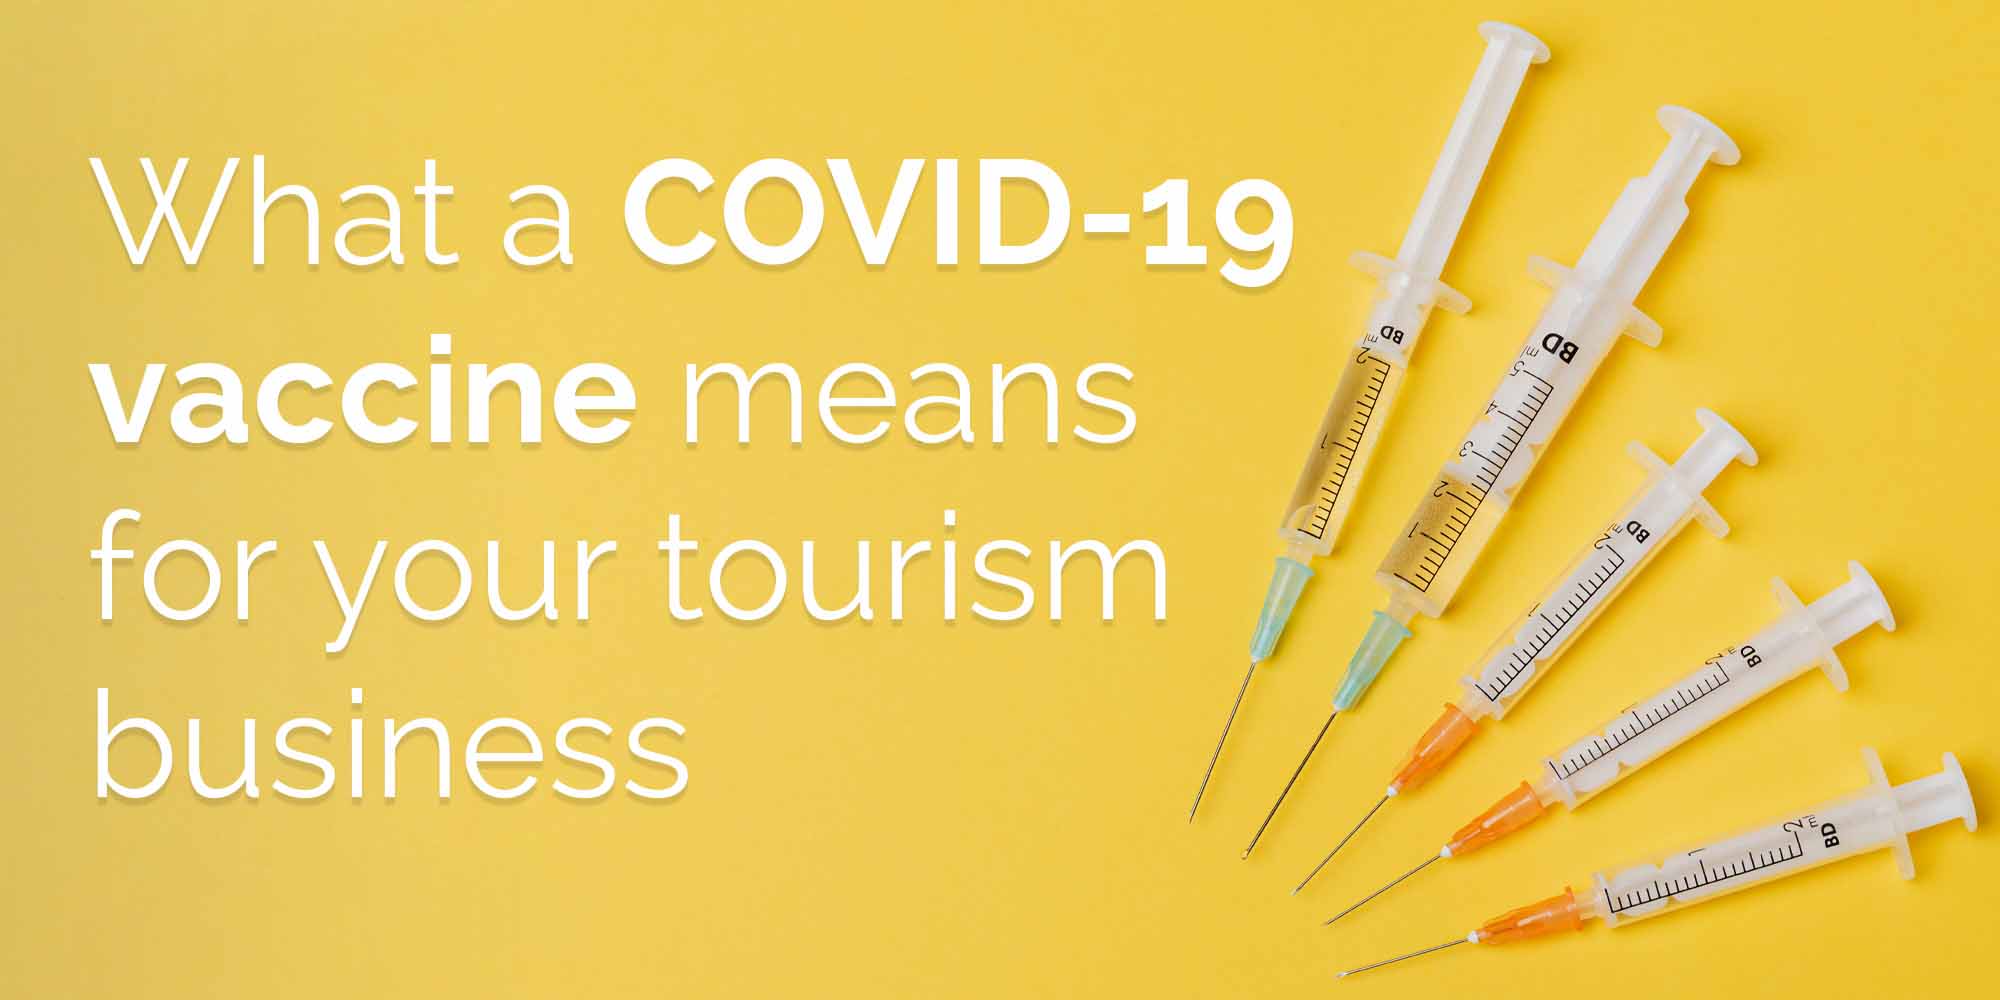 How to prepare your tourism business for a COVID-19 vaccine